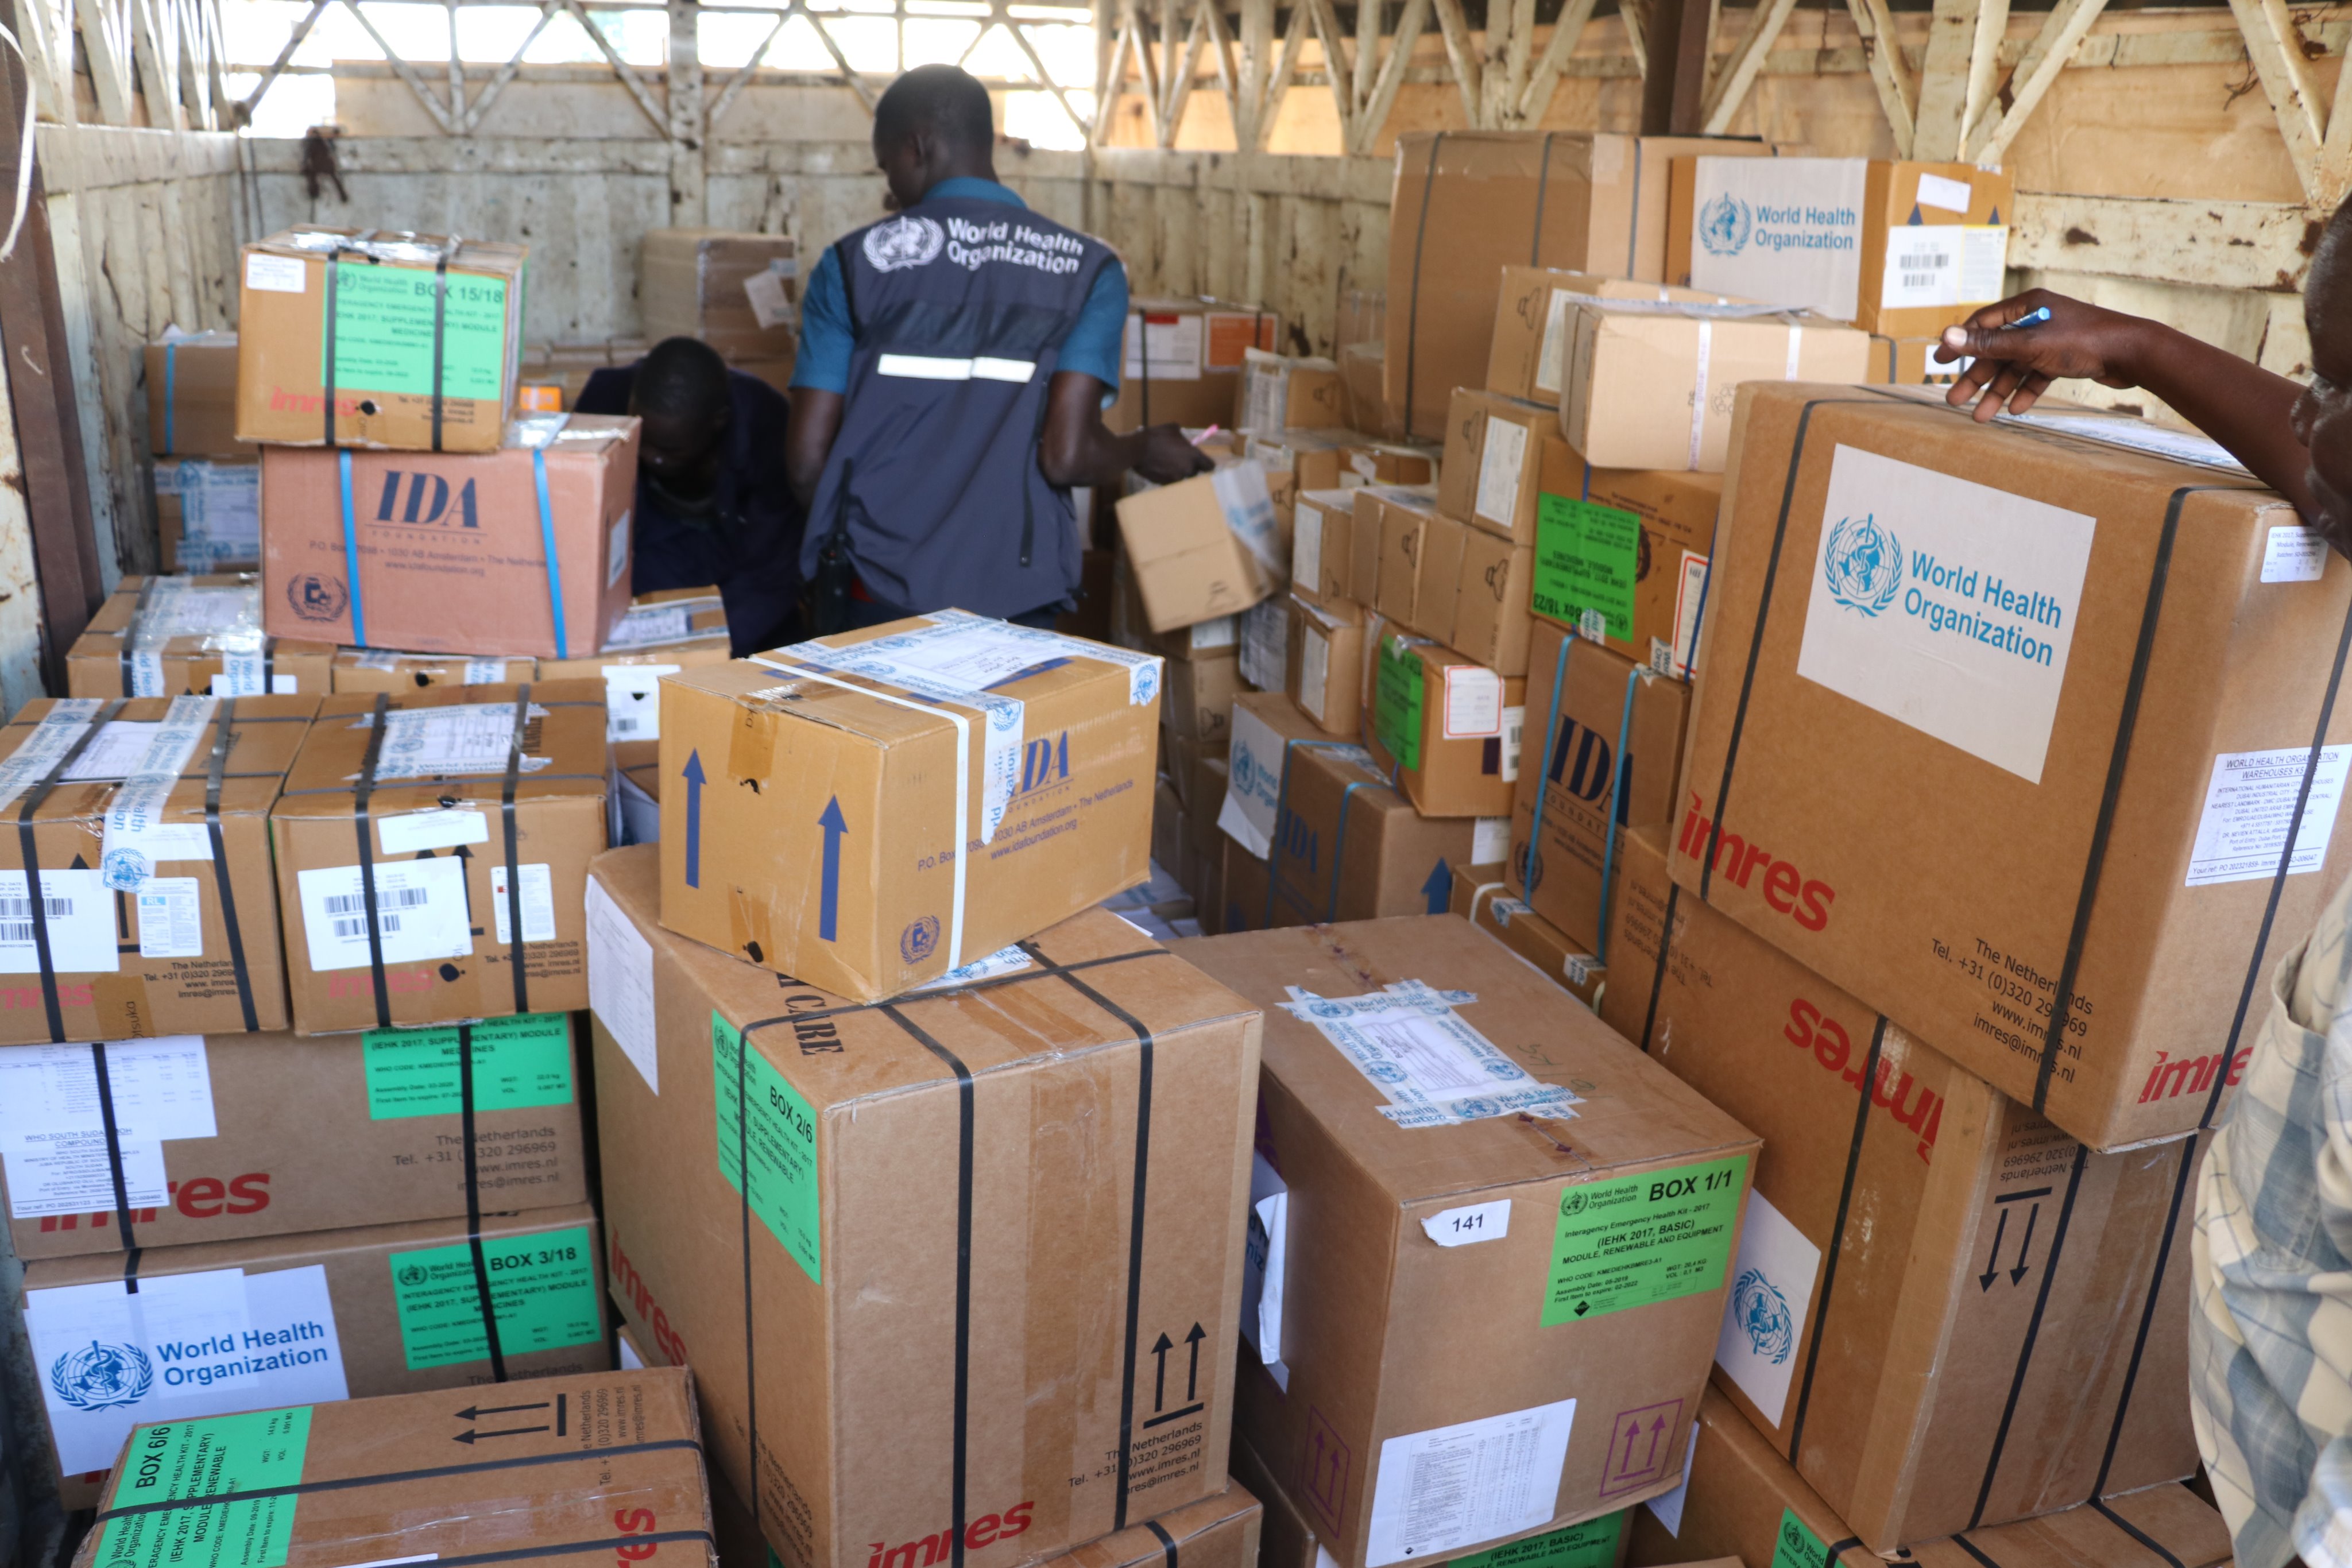 WHO swiftly delivered medical supplies to aid those impacted by the floods.